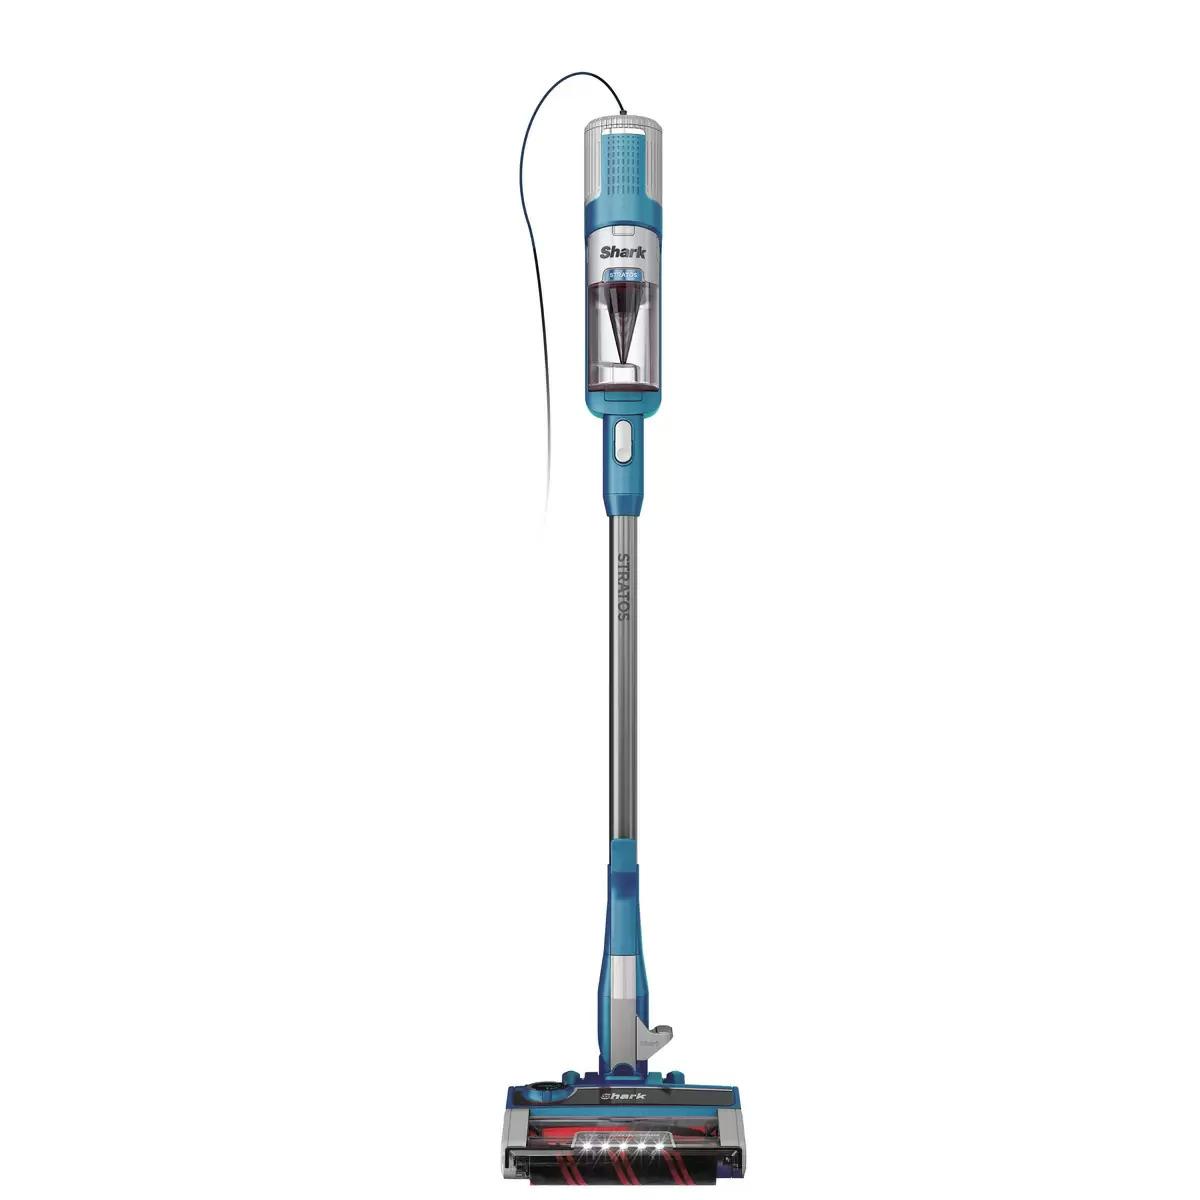 Shark Stratos Ultralight Corded Stick Vacuum for $99.99 Shipped